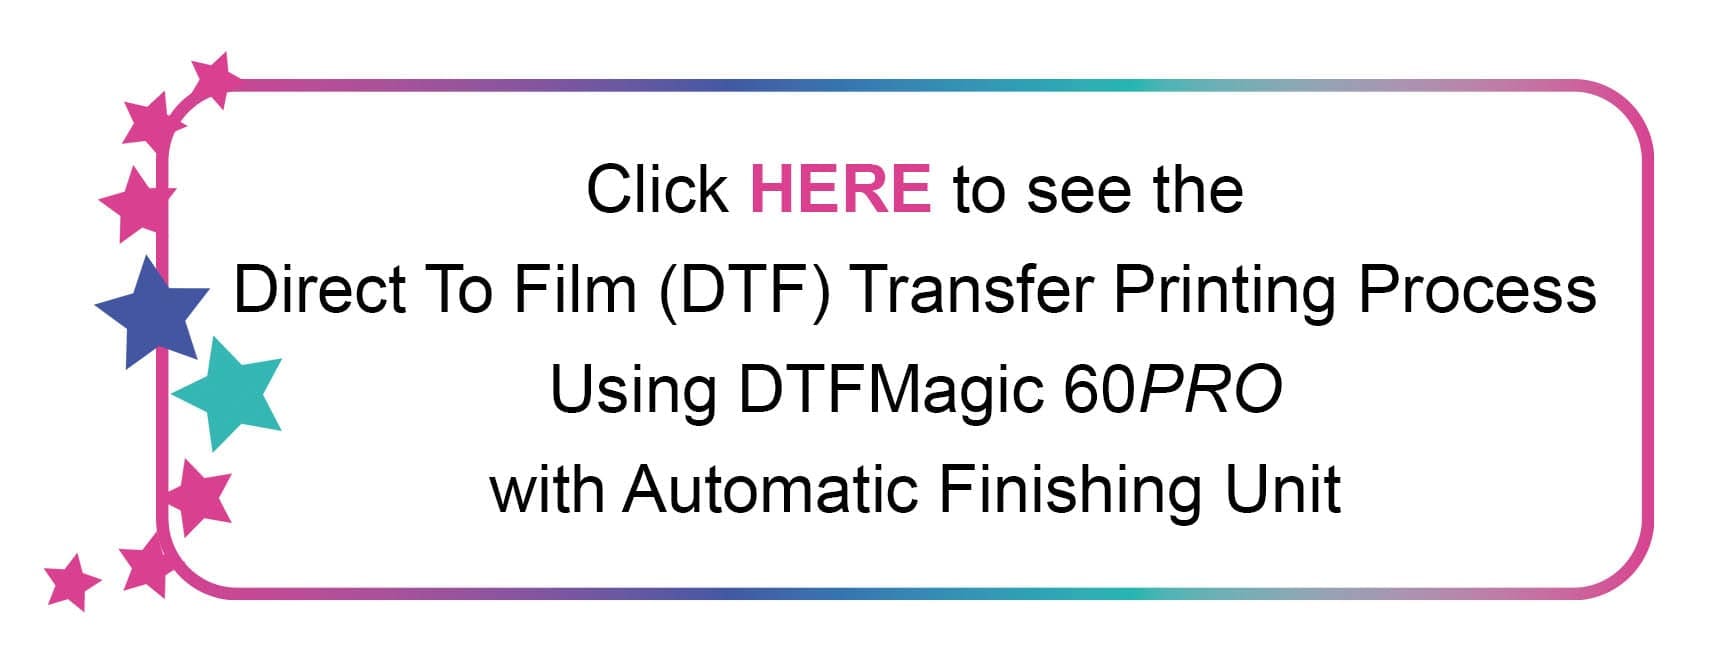 dtf finisher process